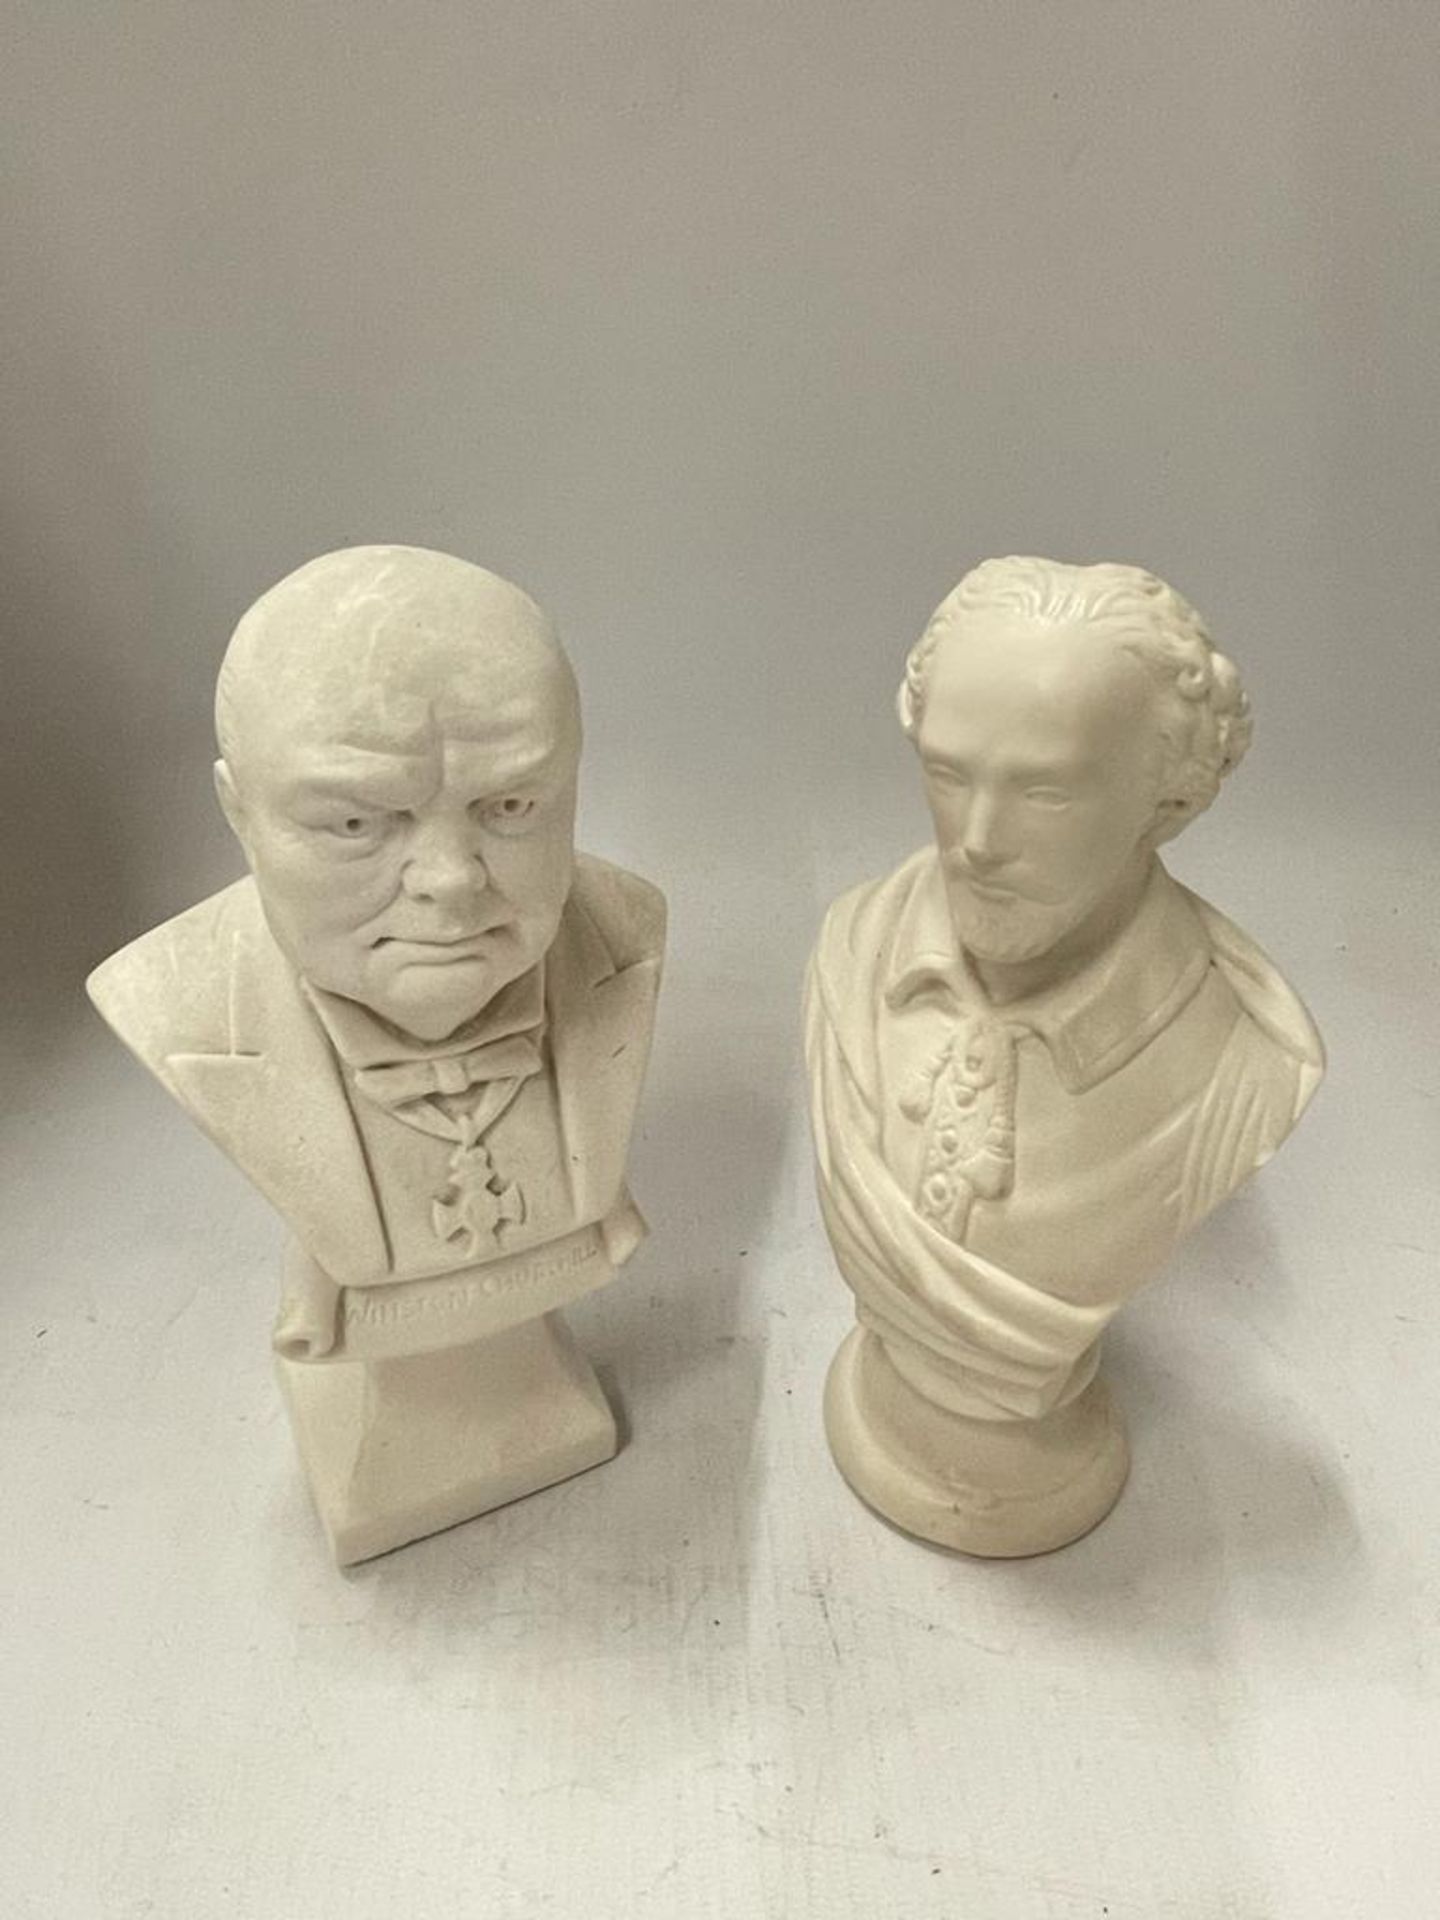 TWO VINTAGE BUSTS OF WINSTON CHURCHILL AND WILLIAM SHAKESPEARE IN MARBLE